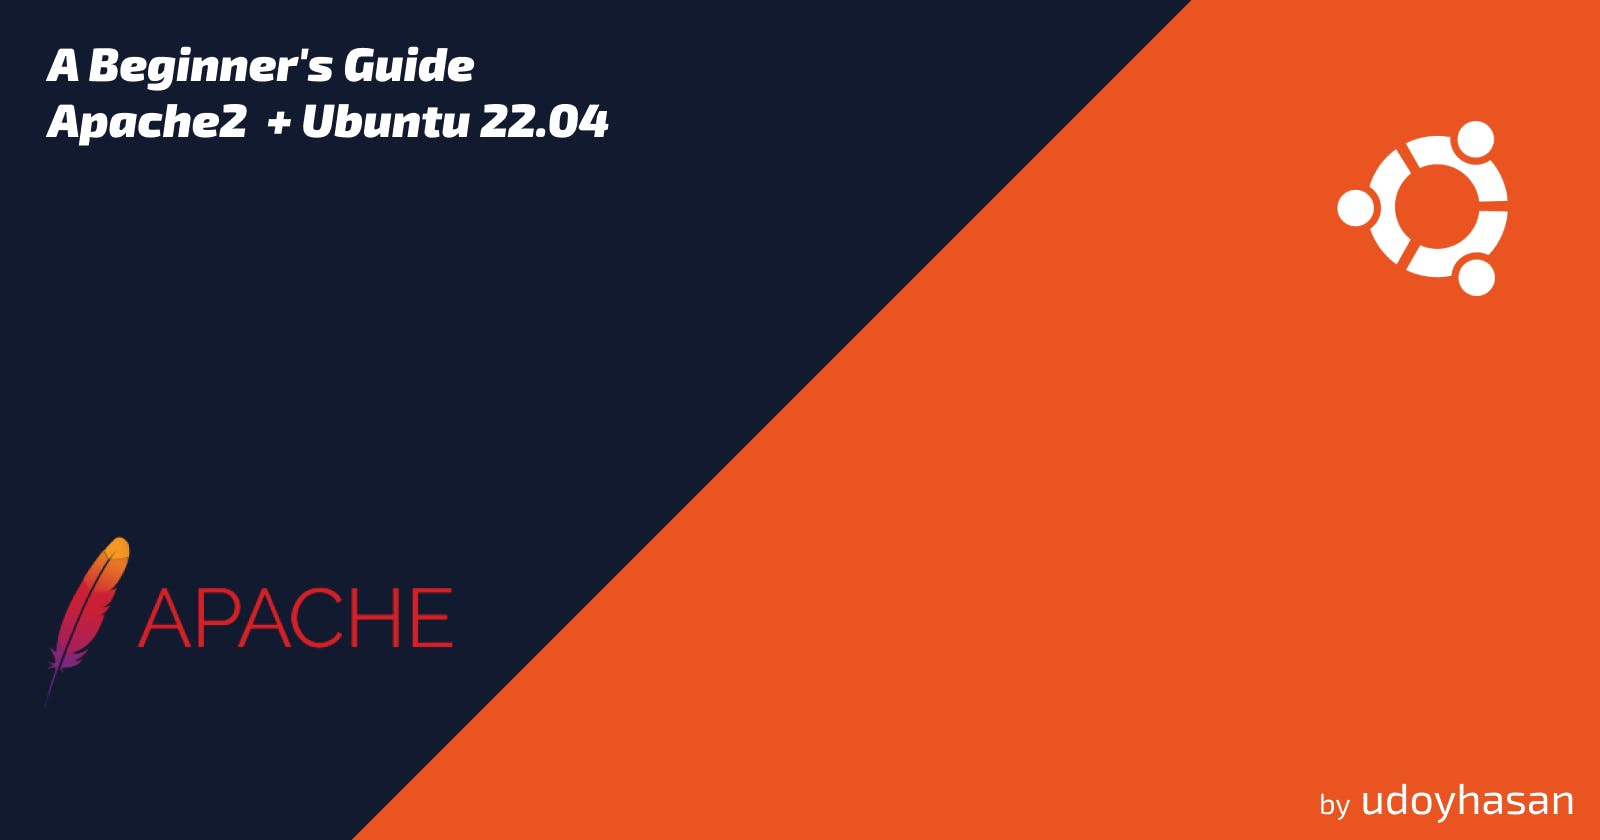 A Beginner's Guide to Install and Configure Apache 2 Web Server on Ubuntu 22.04